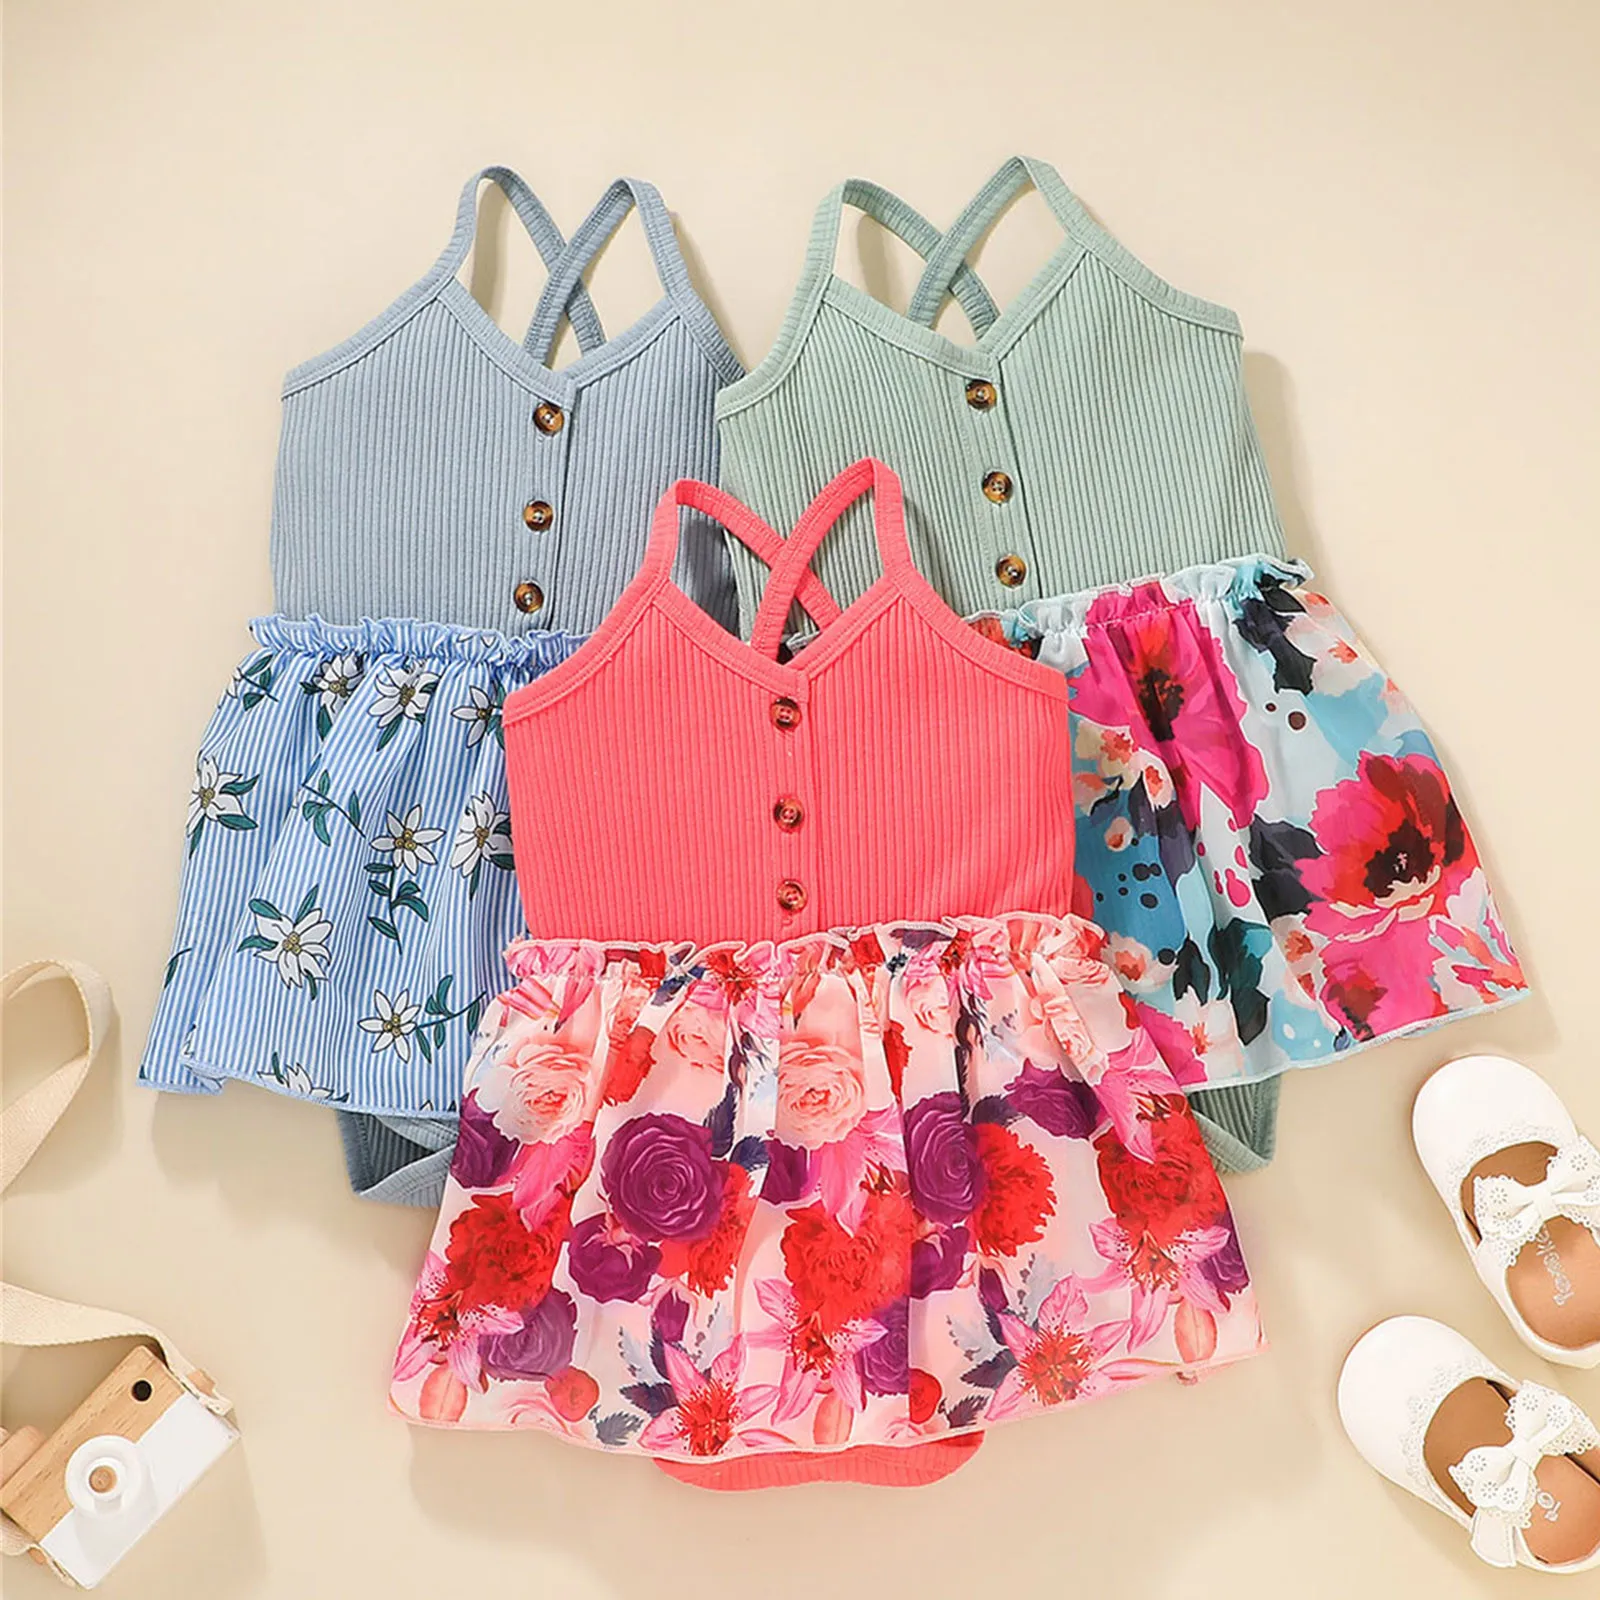 

Infant Baby Girls Bodysuits 2023 Summer Sleeveless Floral Printed Suspenders Newborn Baby Romper Bodysuit Outfits 3-18 Months